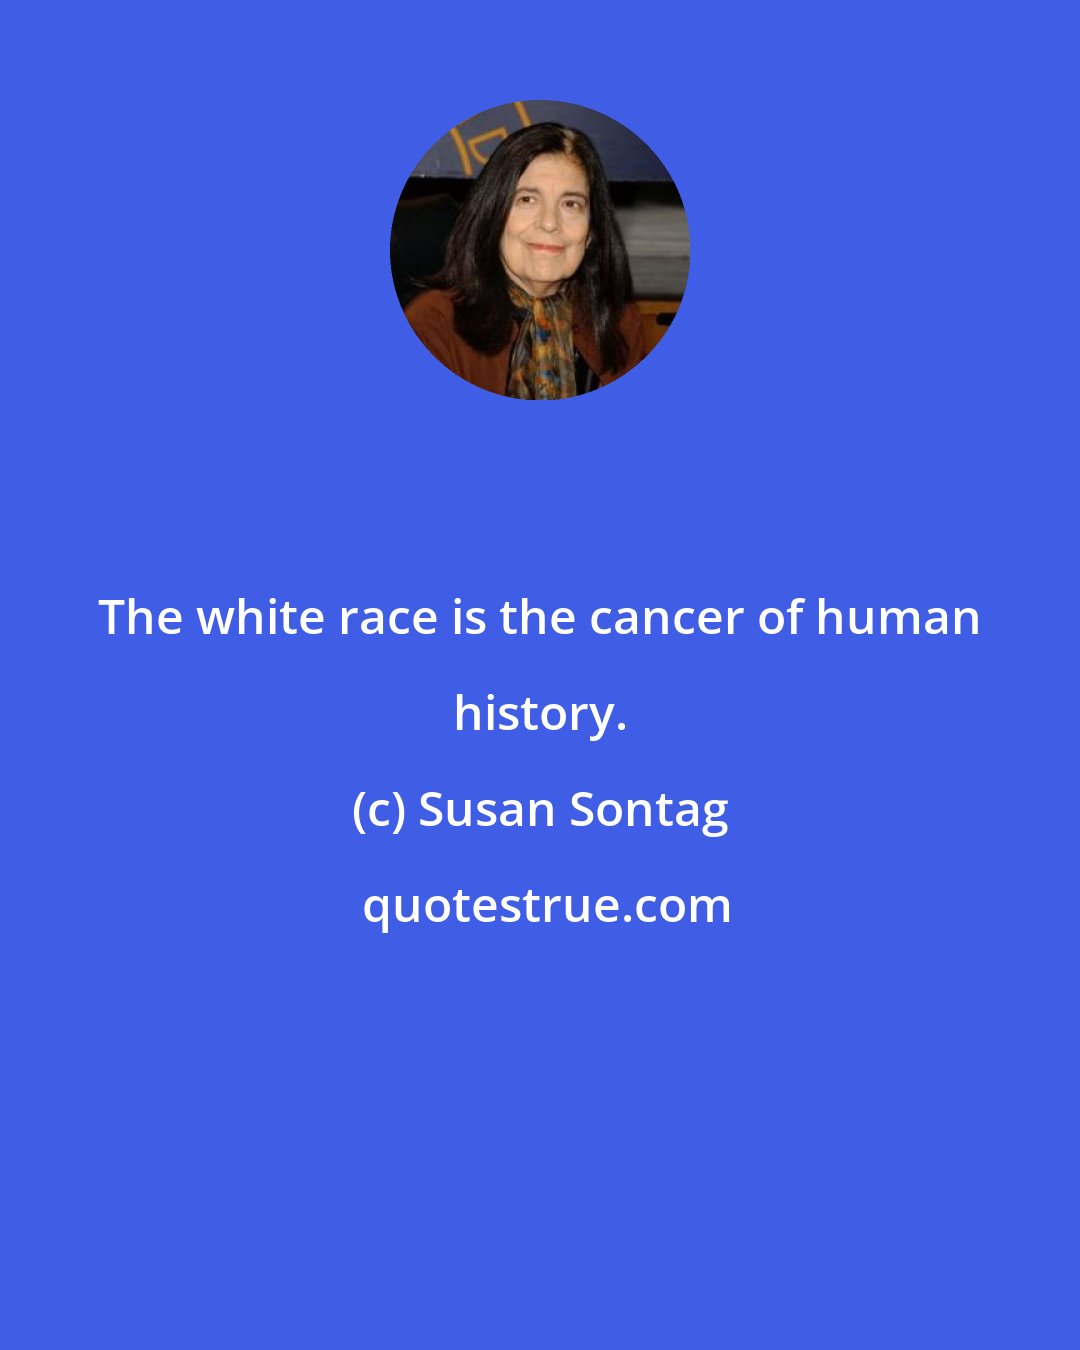 Susan Sontag: The white race is the cancer of human history.